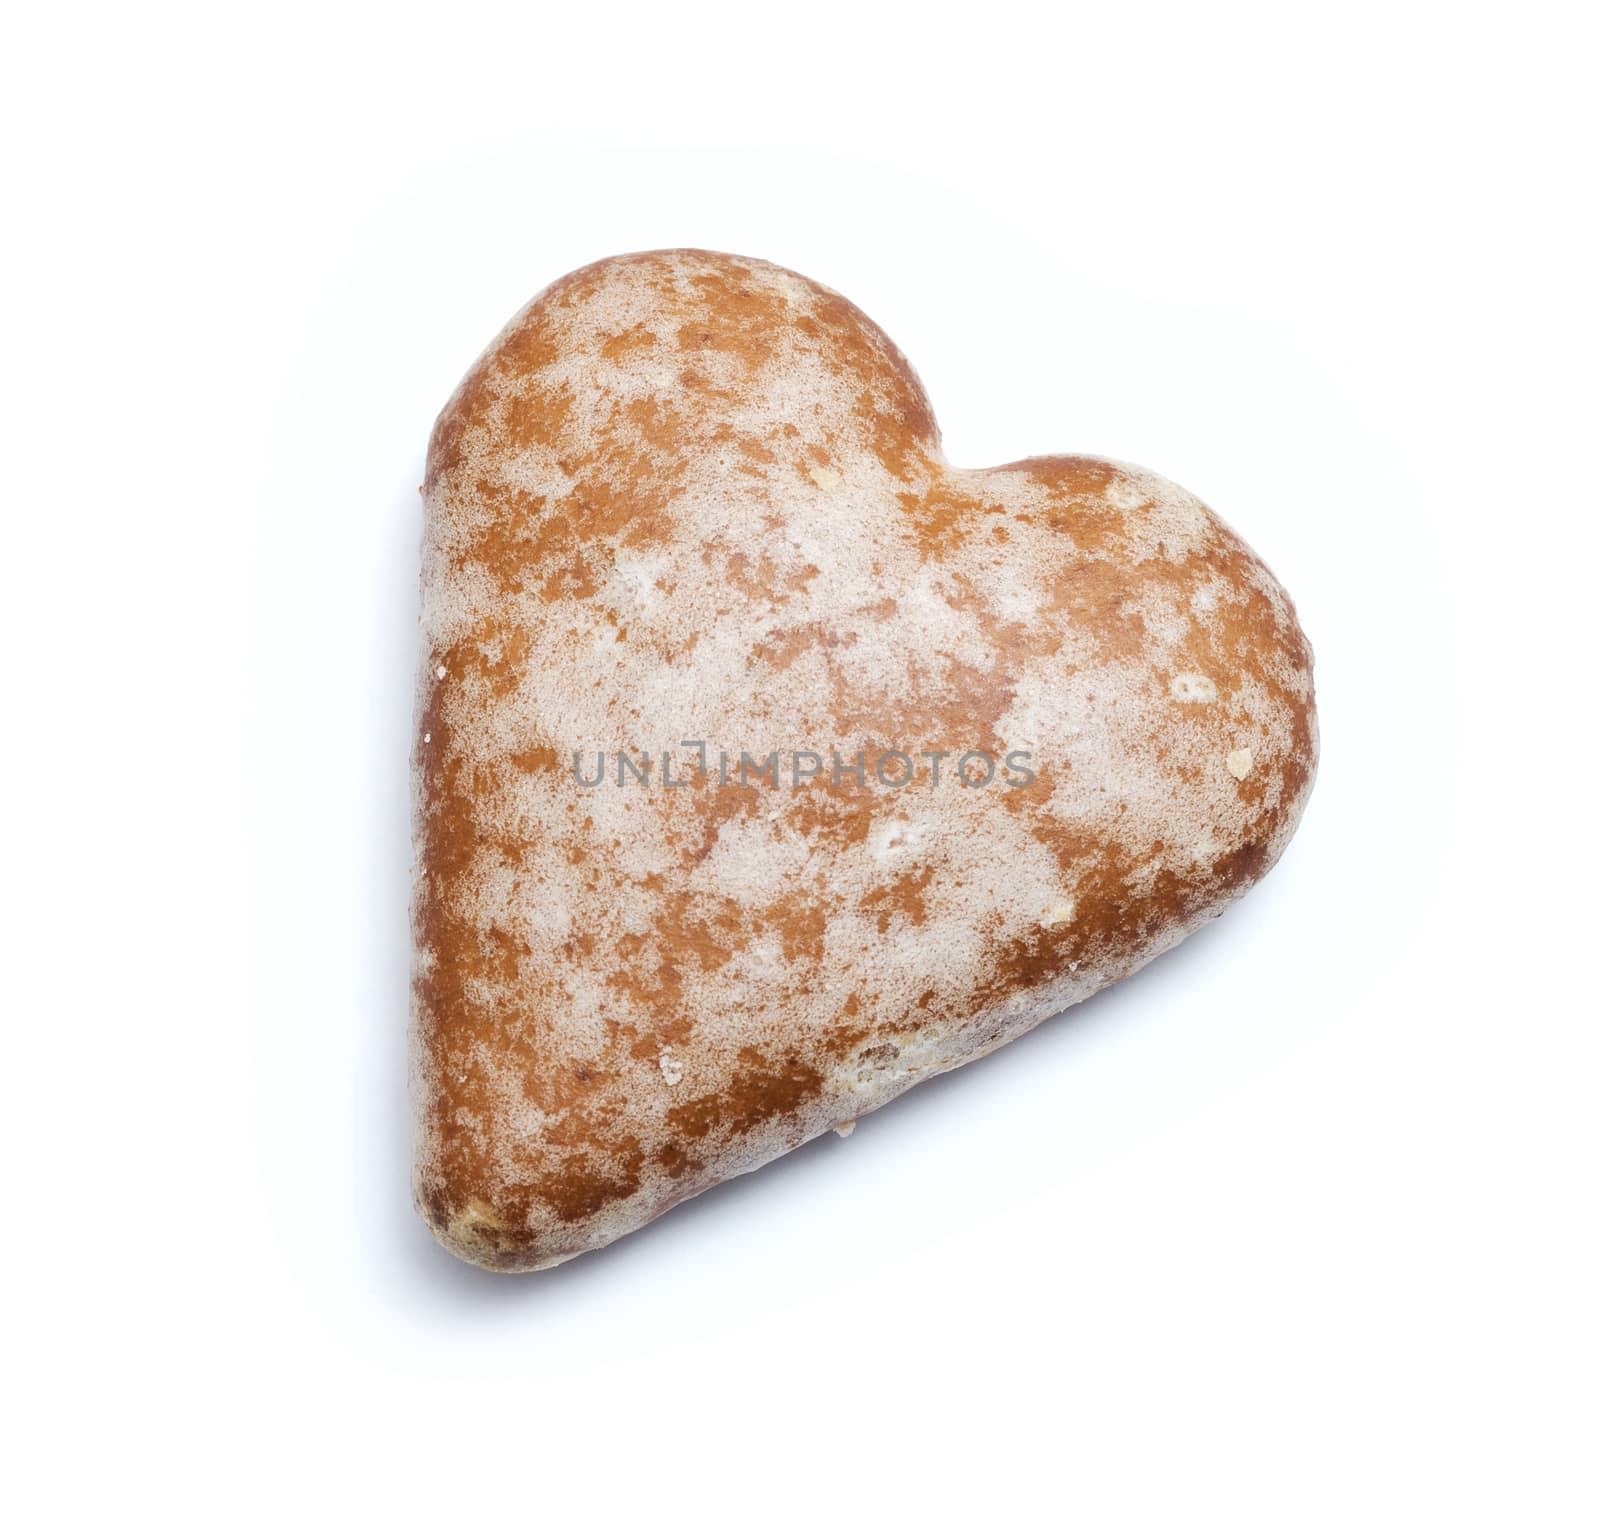 polish traditional gingerbread biscuit isolated on white